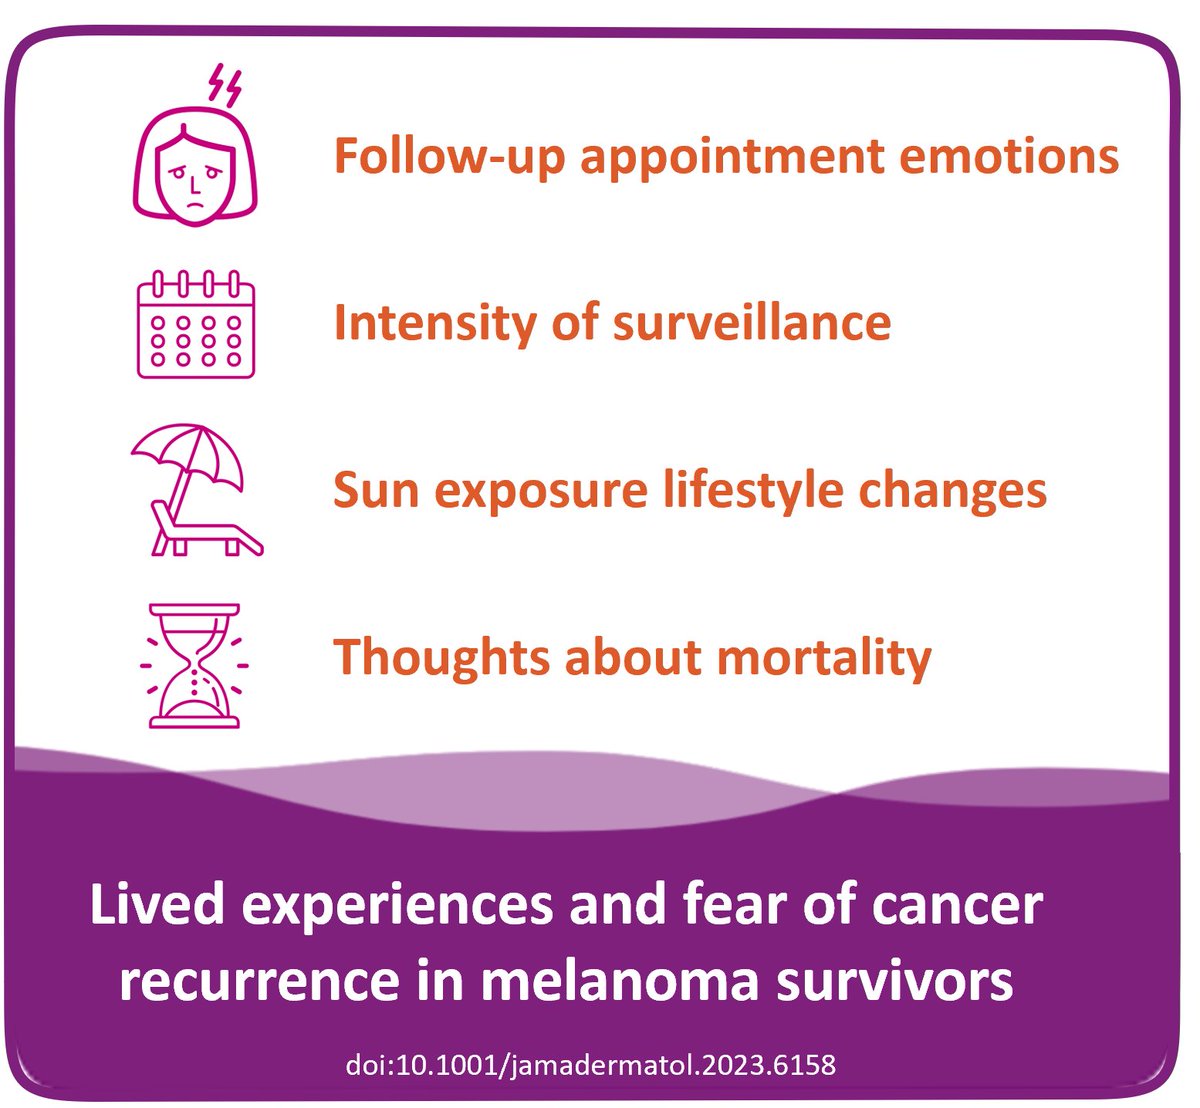 Recent survey data in @JAMADerm revealed that early-stage melanoma patients, despite excellent prognoses, had intense negative psychological experiences. bit.ly/3T8beTS. #AMBLor can provide reassurance to those found to be at low risk of disease progression.